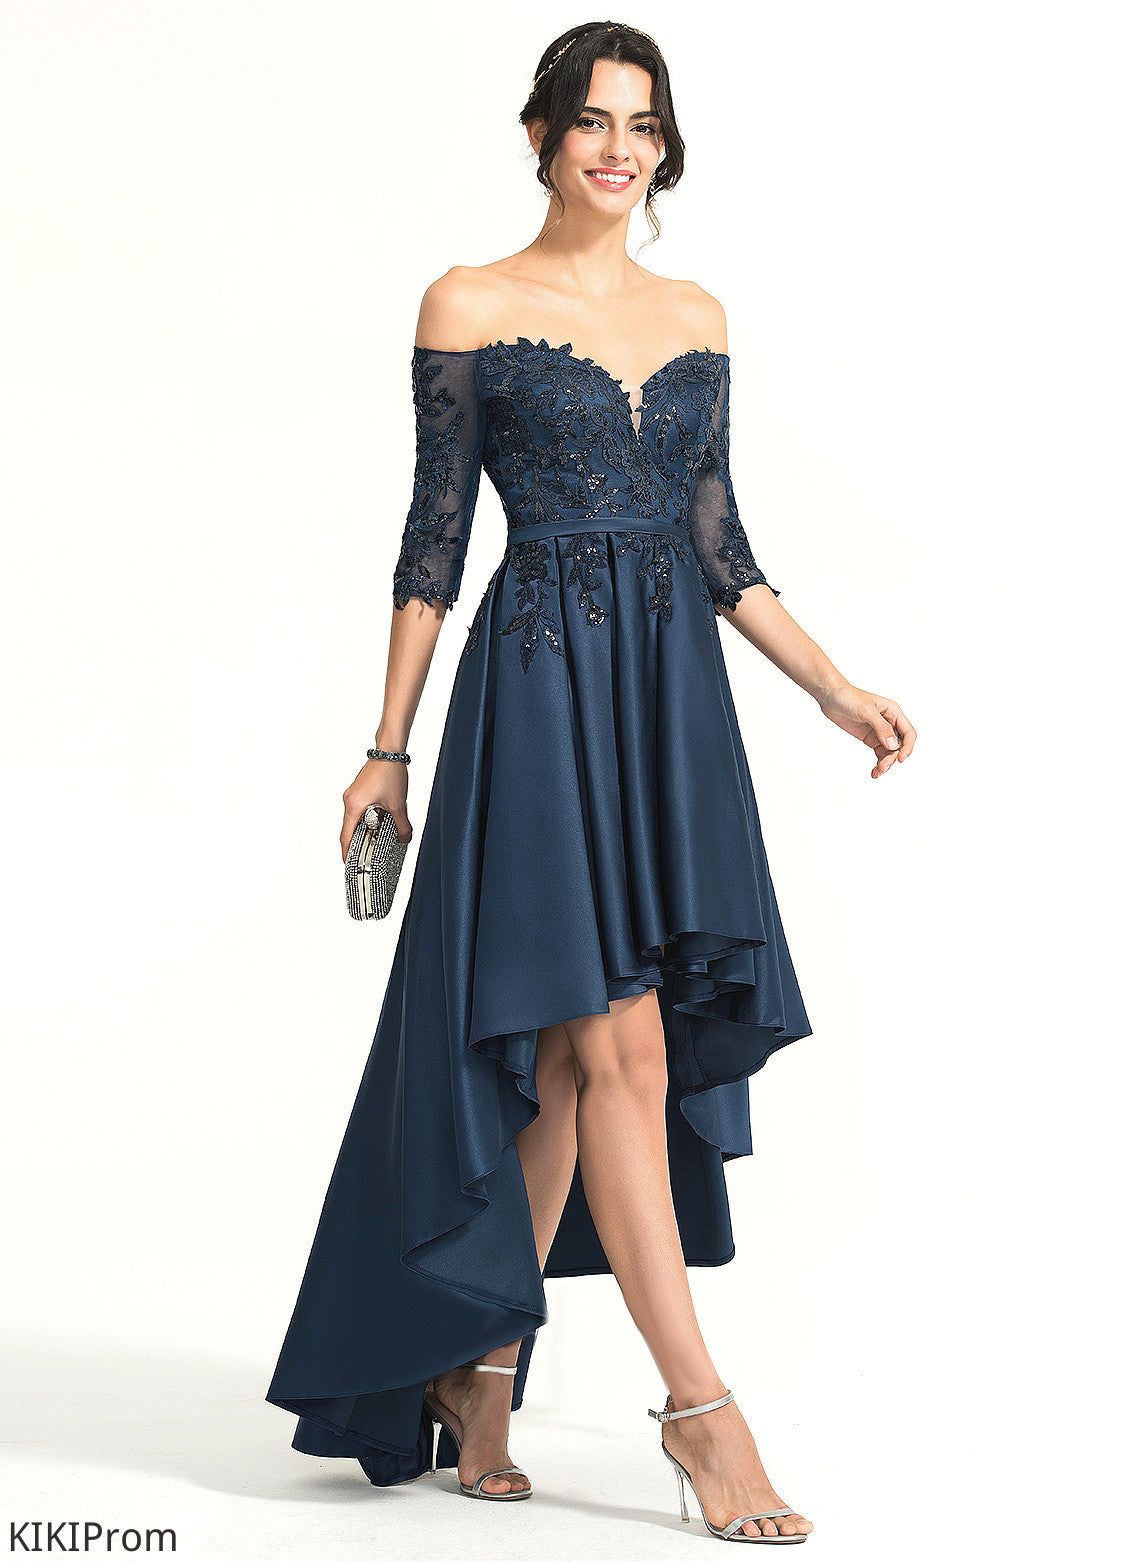 Satin Lace Homecoming Off-the-Shoulder Asymmetrical Moira Dress Homecoming Dresses A-Line With